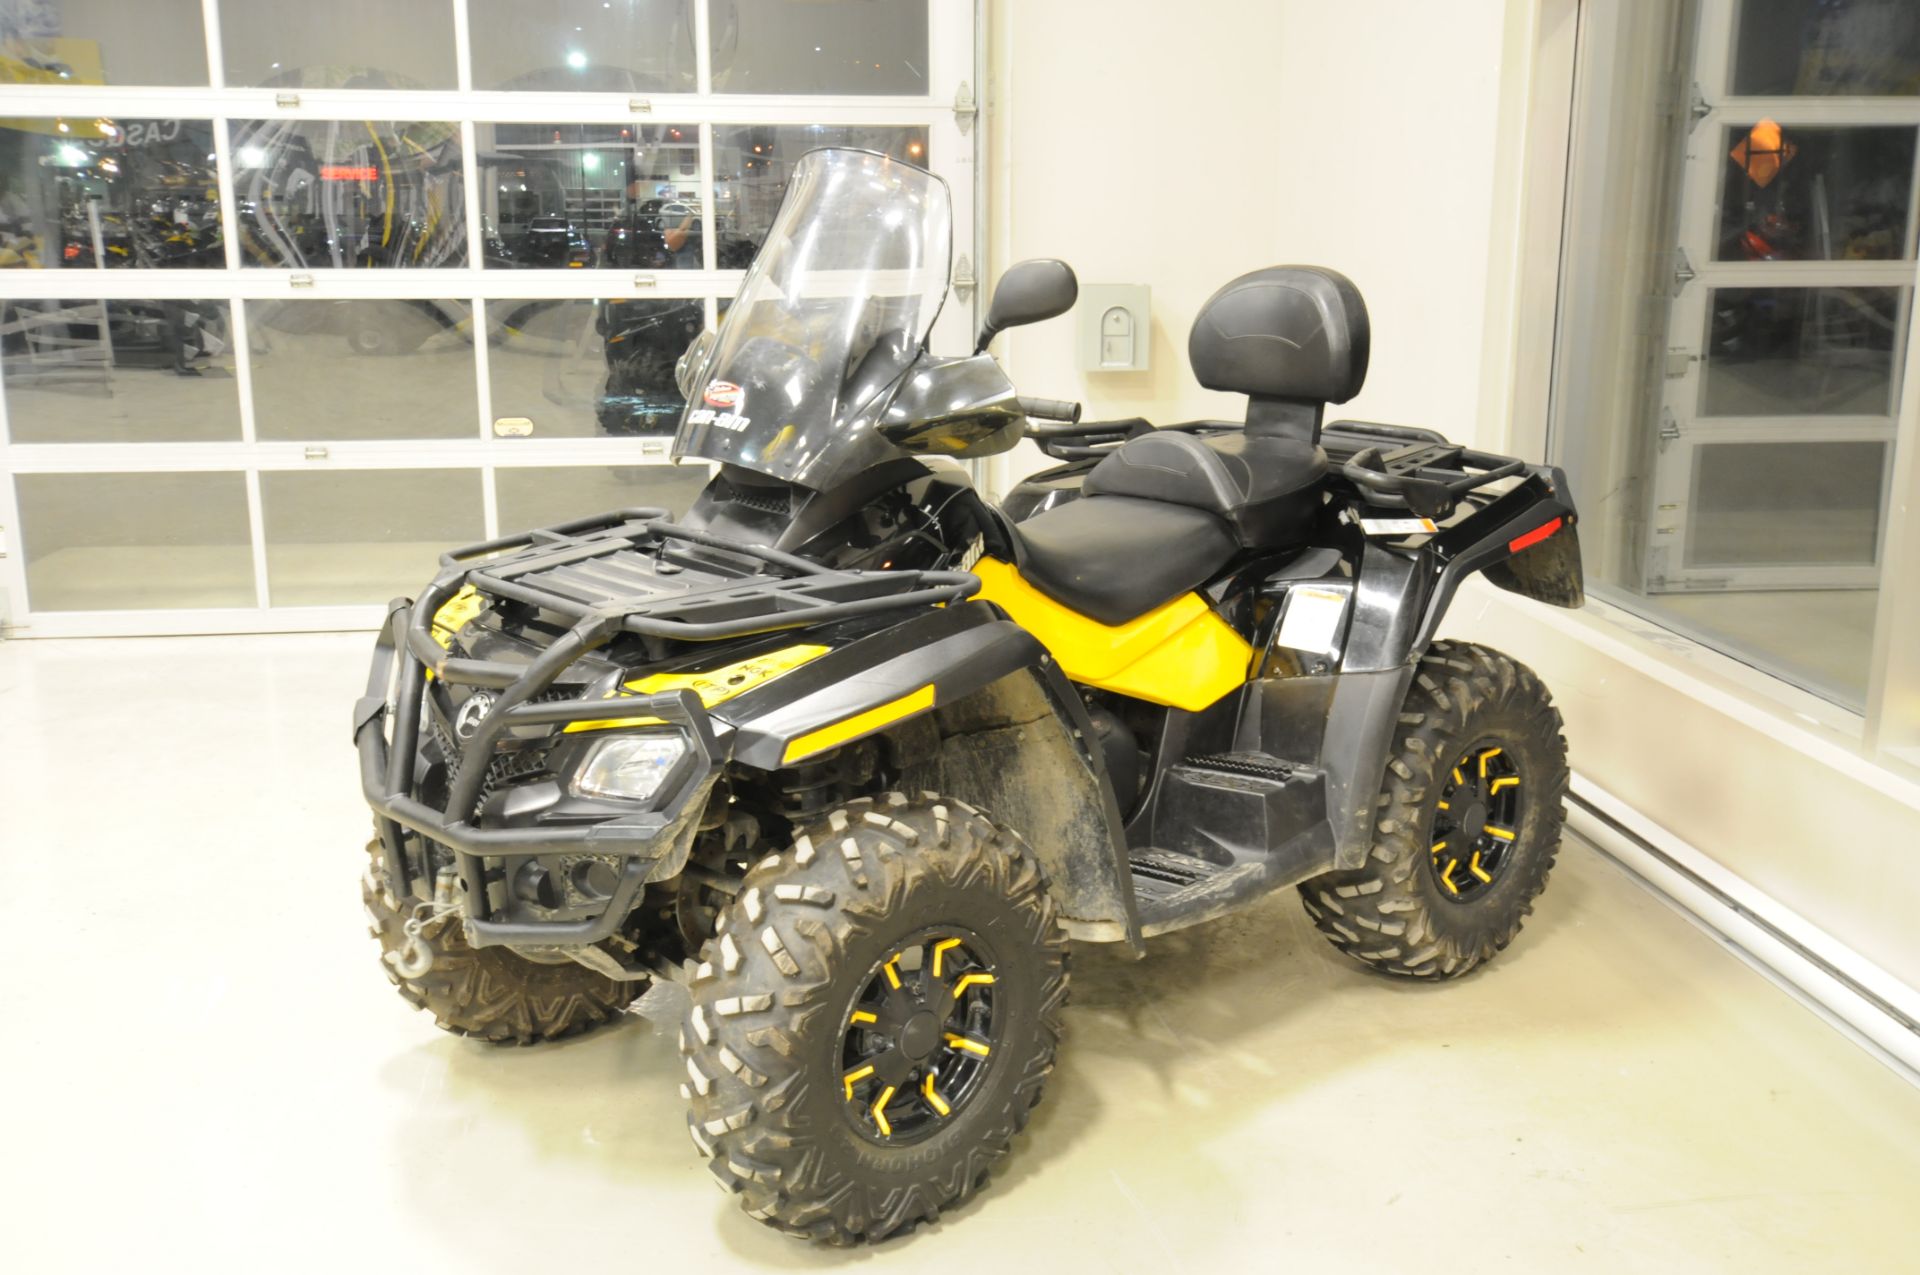 BRP CAN AM (2011) MAX800 ATV AVEC MOTEUR ROTAX 800R V-TWIN 4-TEMPS, 4X4, WARN TREUIL A CABLE AVANT - Image 3 of 6